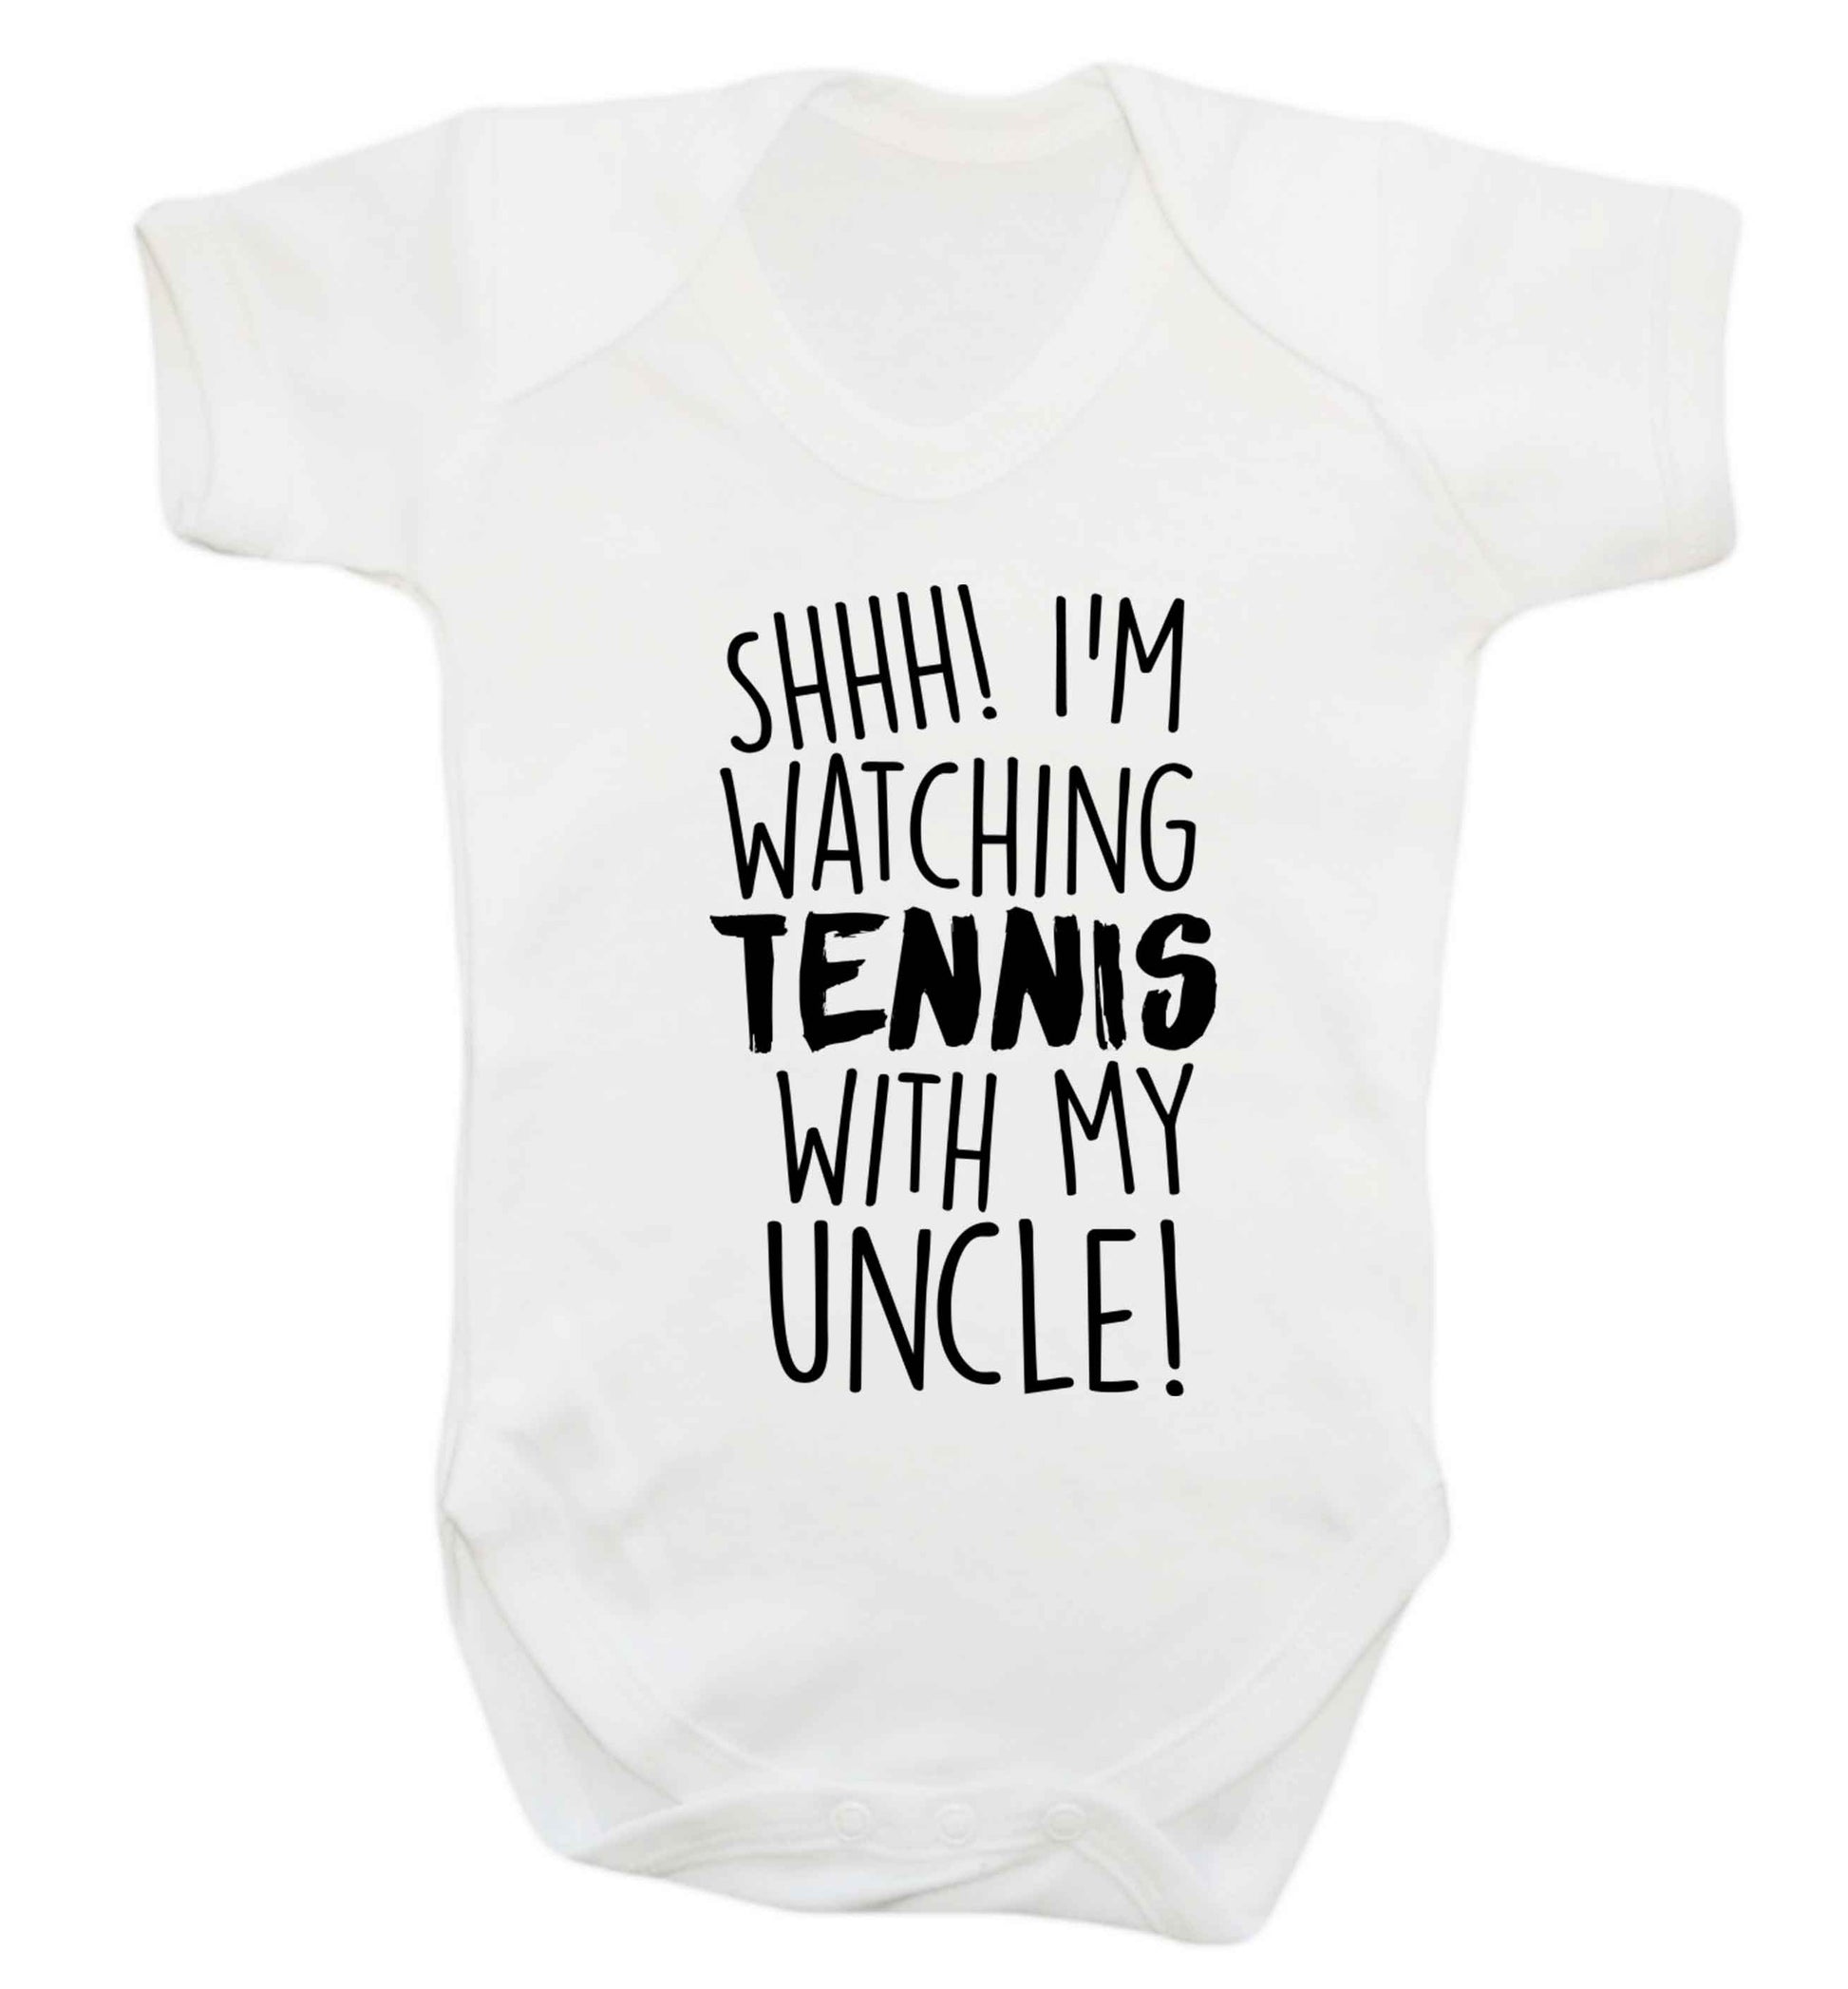 Shh! I'm watching tennis with my uncle! Baby Vest white 18-24 months